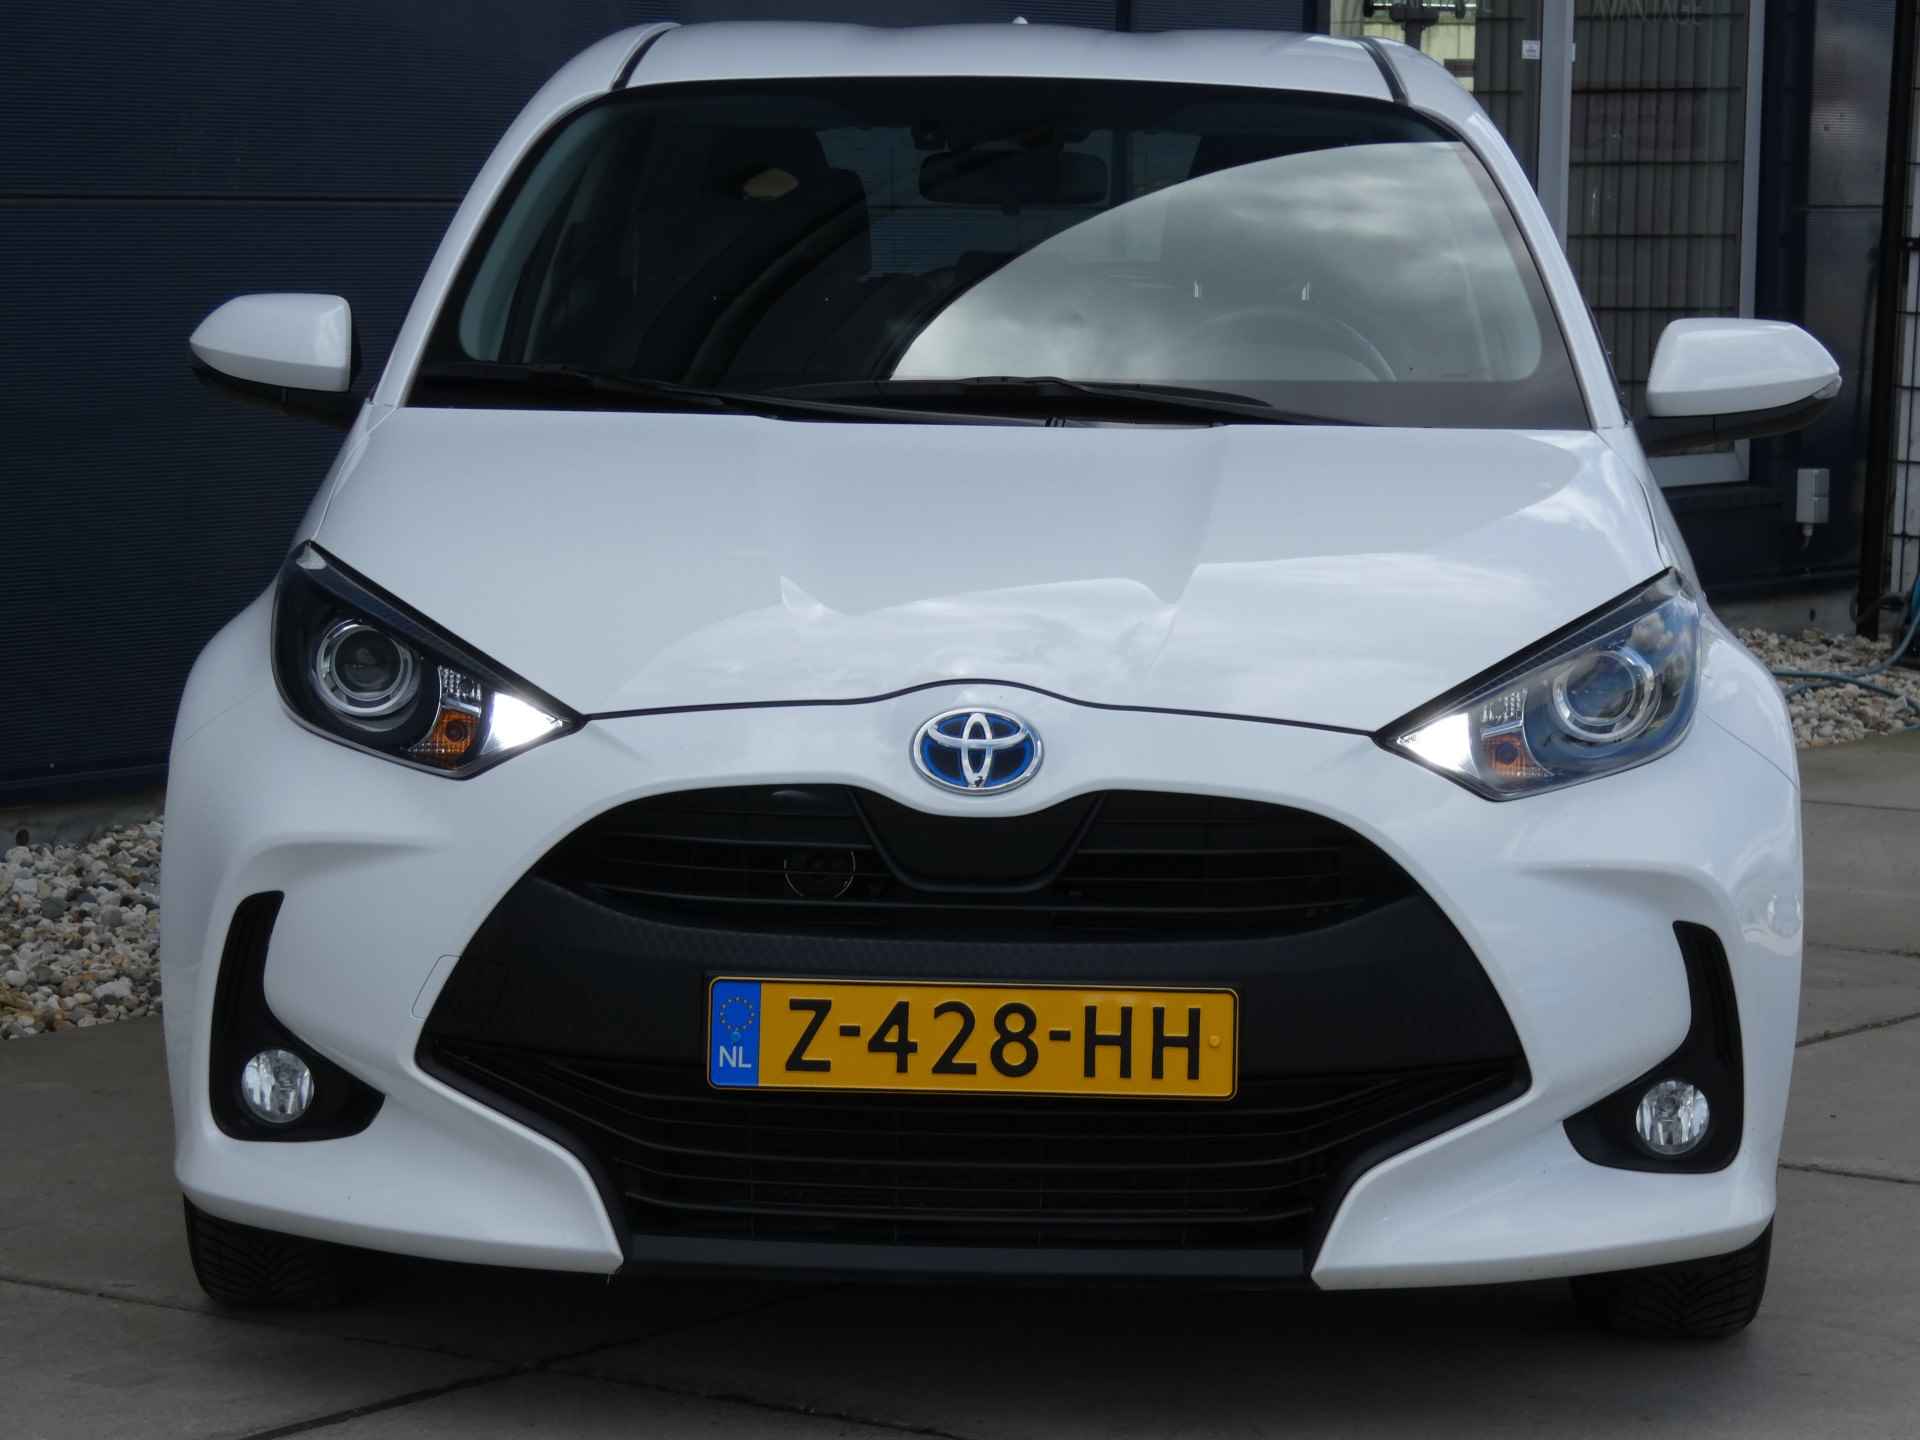 Toyota Yaris 1.5 Hybrid Active Automaat | Navigatie | Apple Carplay & Android Auto | Climate Control - 7/42